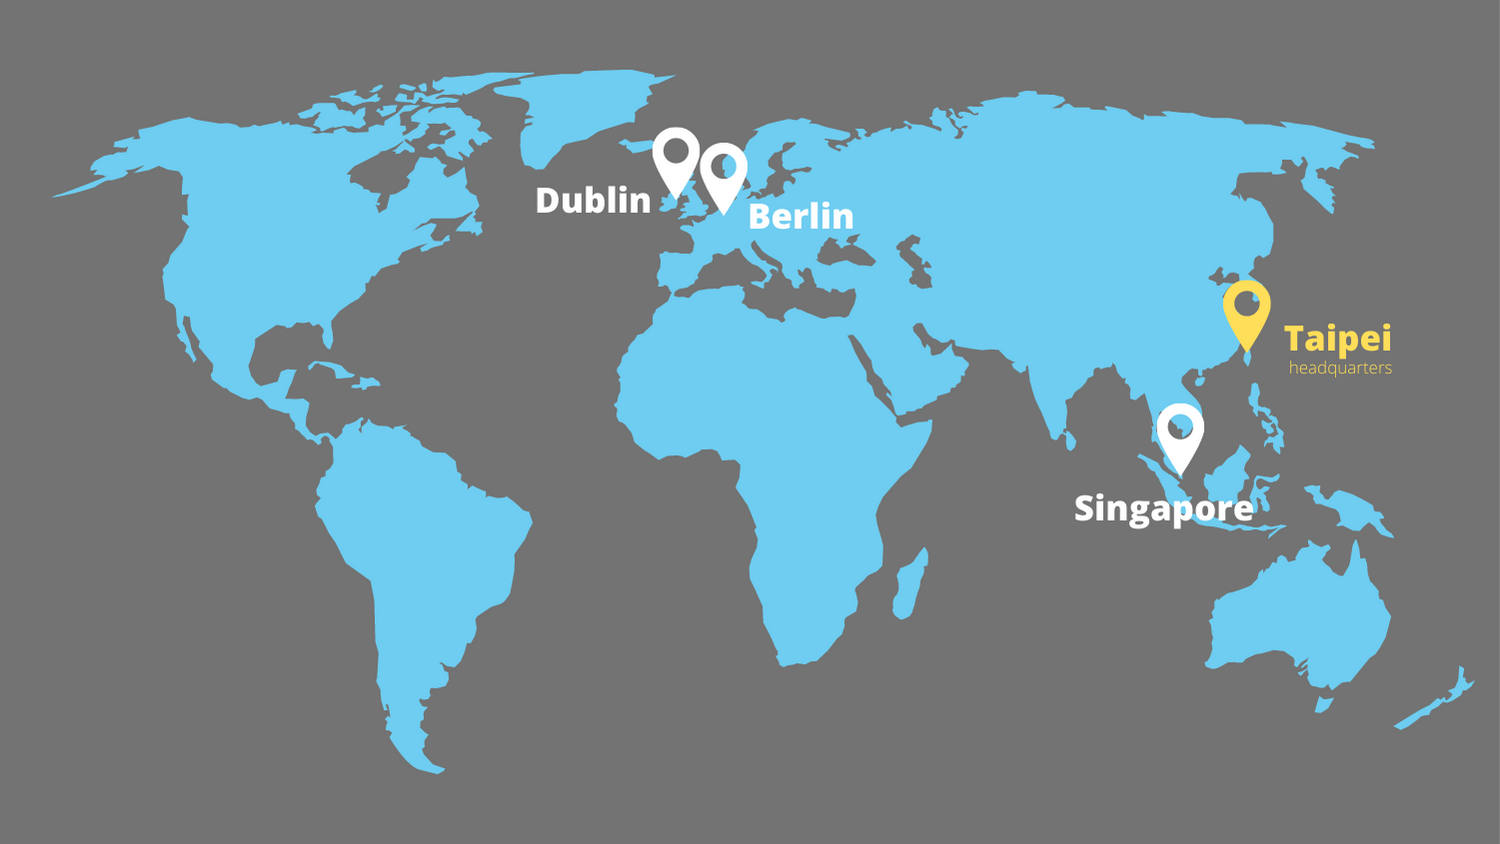 Where To Find Keego Mobility - Taipei Headquarters,  Singapore, Dublin and Berlin